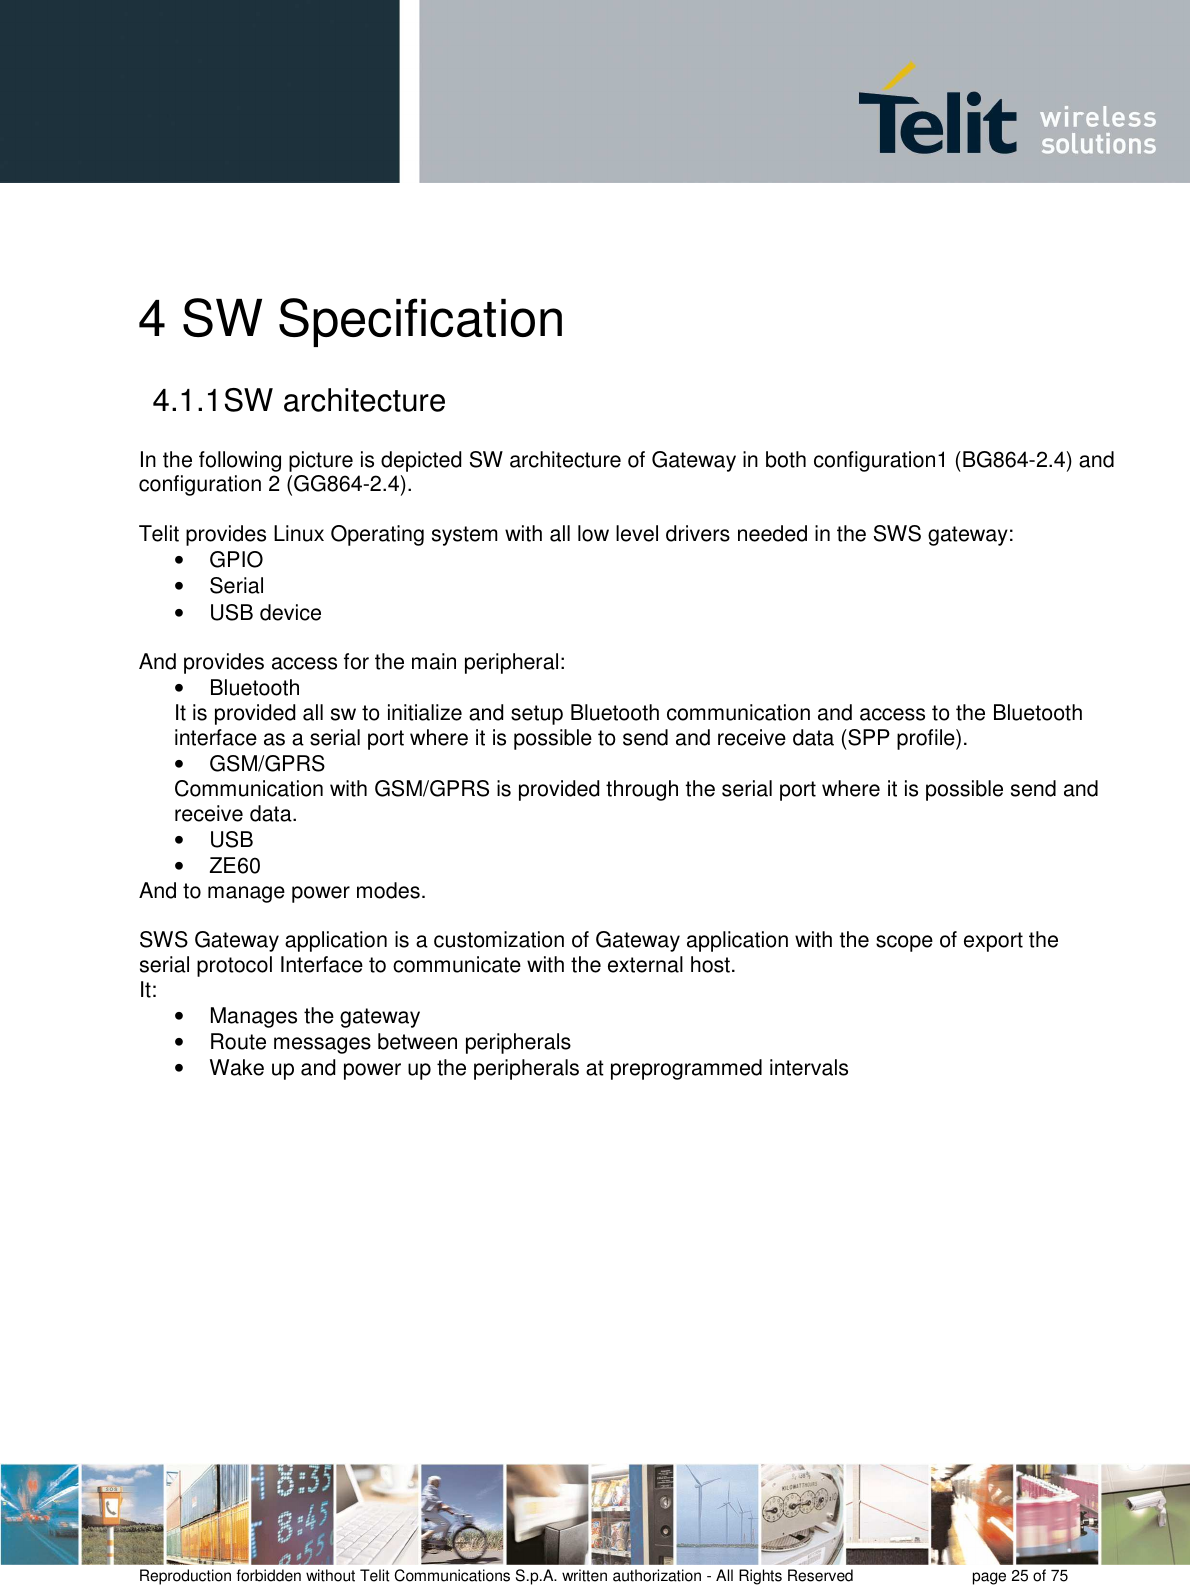       Reproduction forbidden without Telit Communications S.p.A. written authorization - All Rights Reserved    page 25 of 75  4 SW Specification 4.1.1 SW architecture  In the following picture is depicted SW architecture of Gateway in both configuration1 (BG864-2.4) and configuration 2 (GG864-2.4).  Telit provides Linux Operating system with all low level drivers needed in the SWS gateway: •  GPIO •  Serial •  USB device  And provides access for the main peripheral: •  Bluetooth  It is provided all sw to initialize and setup Bluetooth communication and access to the Bluetooth interface as a serial port where it is possible to send and receive data (SPP profile). •  GSM/GPRS Communication with GSM/GPRS is provided through the serial port where it is possible send and receive data. •  USB •  ZE60 And to manage power modes.  SWS Gateway application is a customization of Gateway application with the scope of export the serial protocol Interface to communicate with the external host. It: •  Manages the gateway •  Route messages between peripherals •  Wake up and power up the peripherals at preprogrammed intervals  